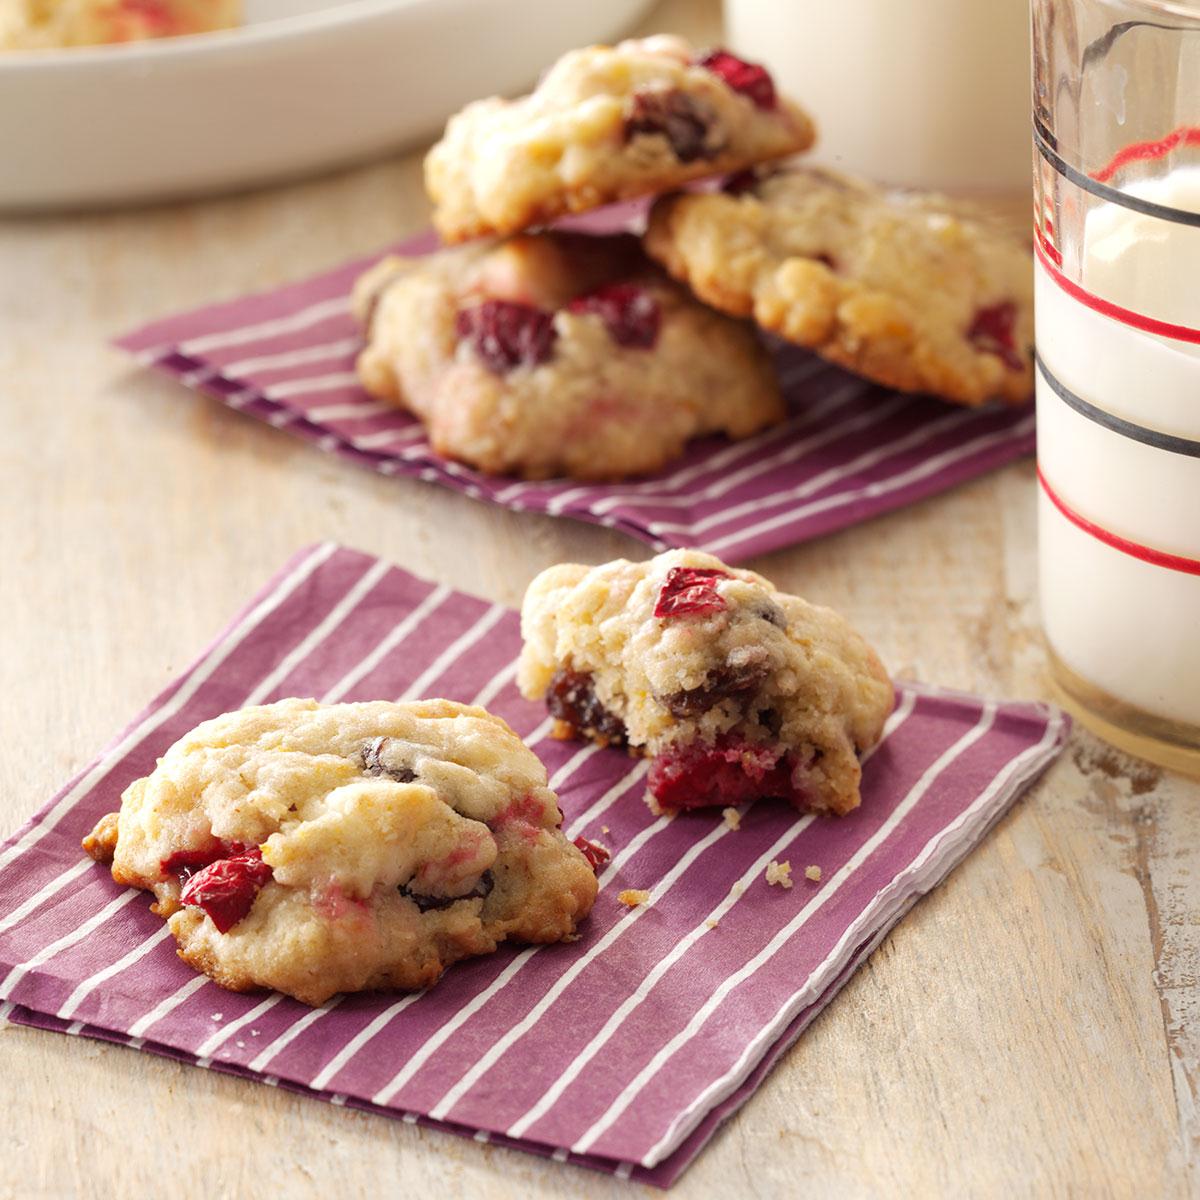 Cranberry Oatmeal Cookies Recipe: How to Make It